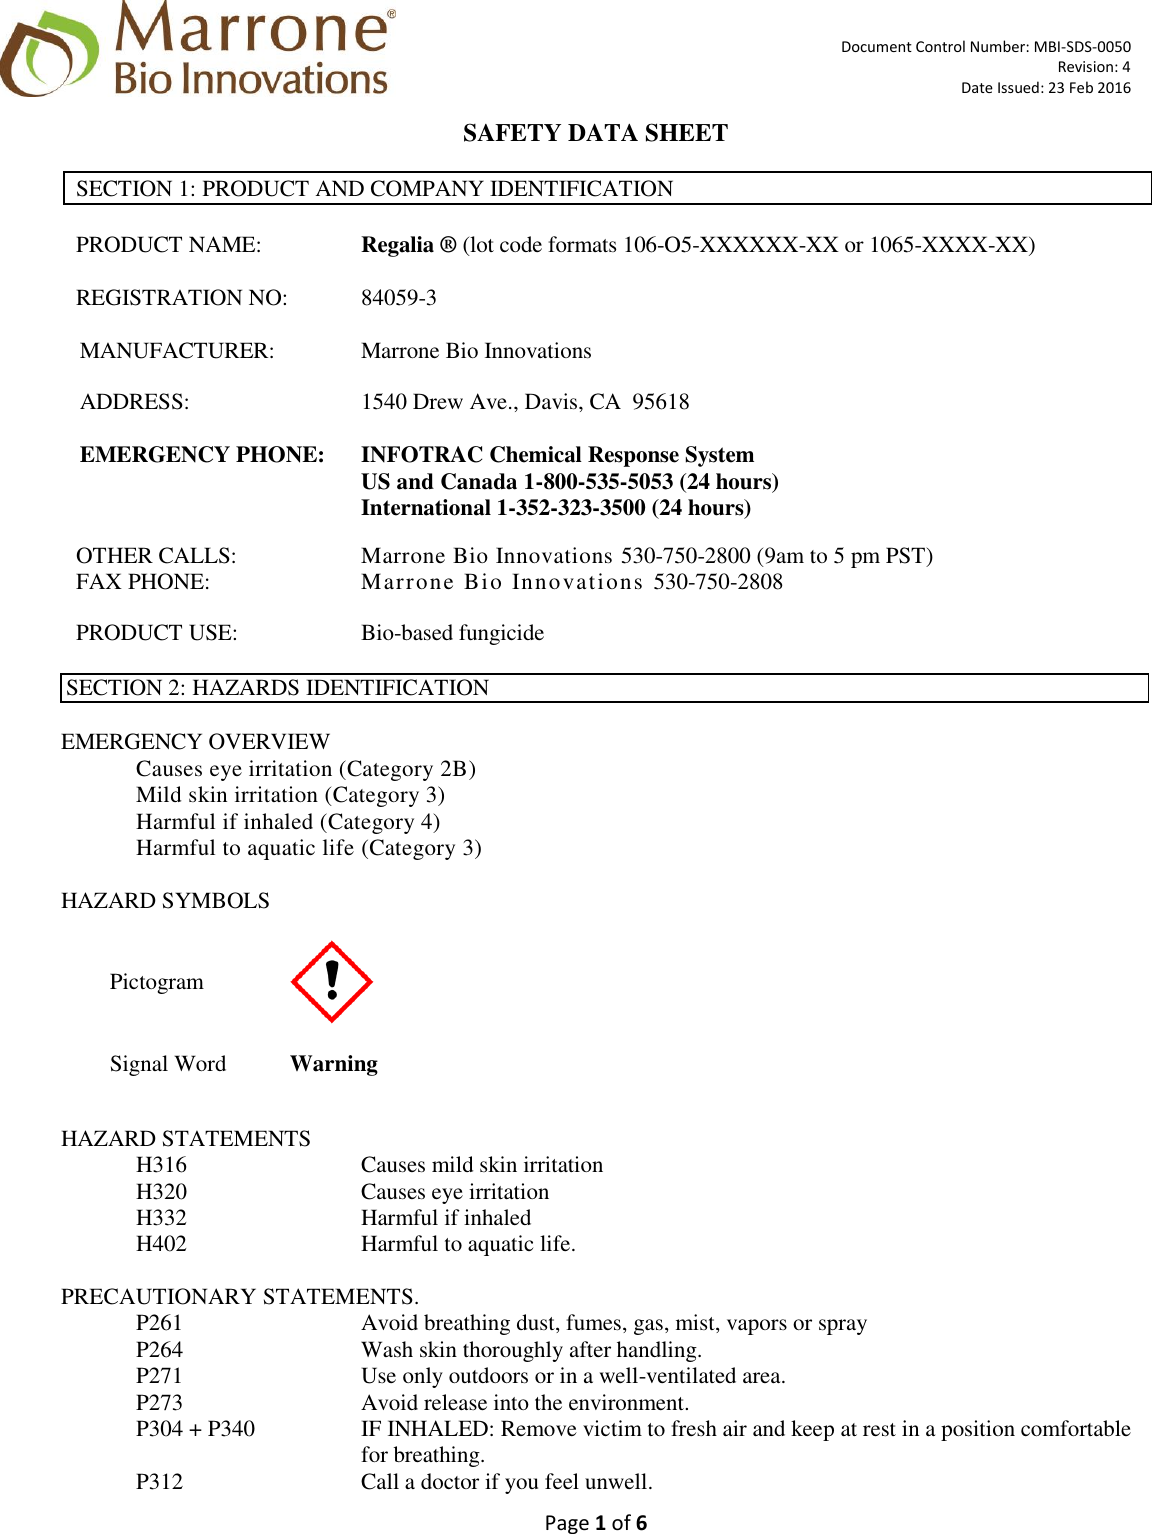 Page 1 of 6 - MATERIAL SAFETY DATA SHEET  OF X Regalia SDS